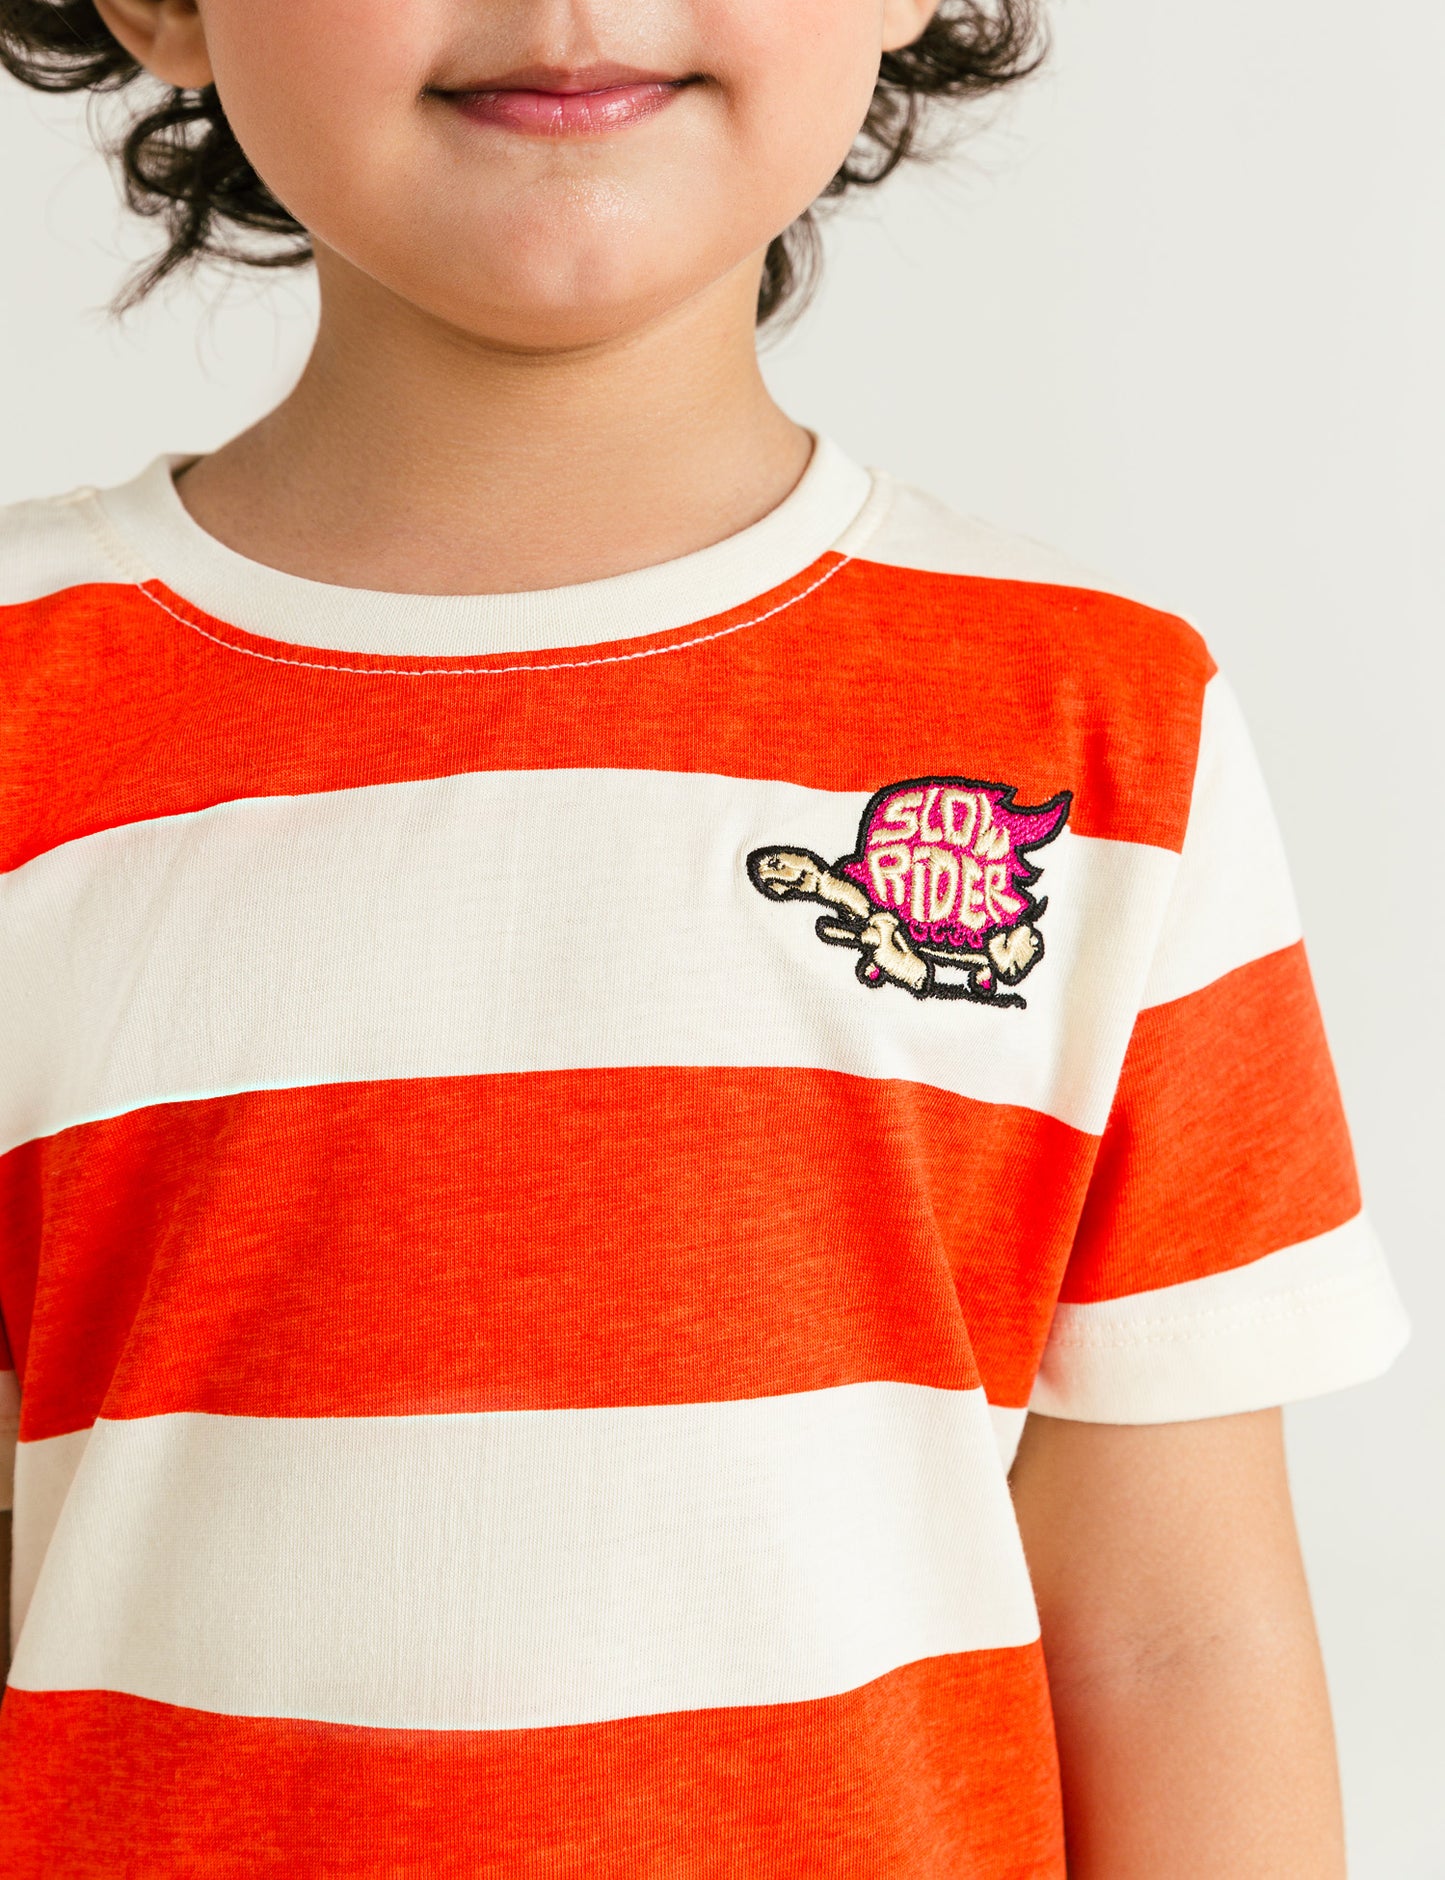 SLOW RIDER STRIPED GRAPHIC T-SHIRT